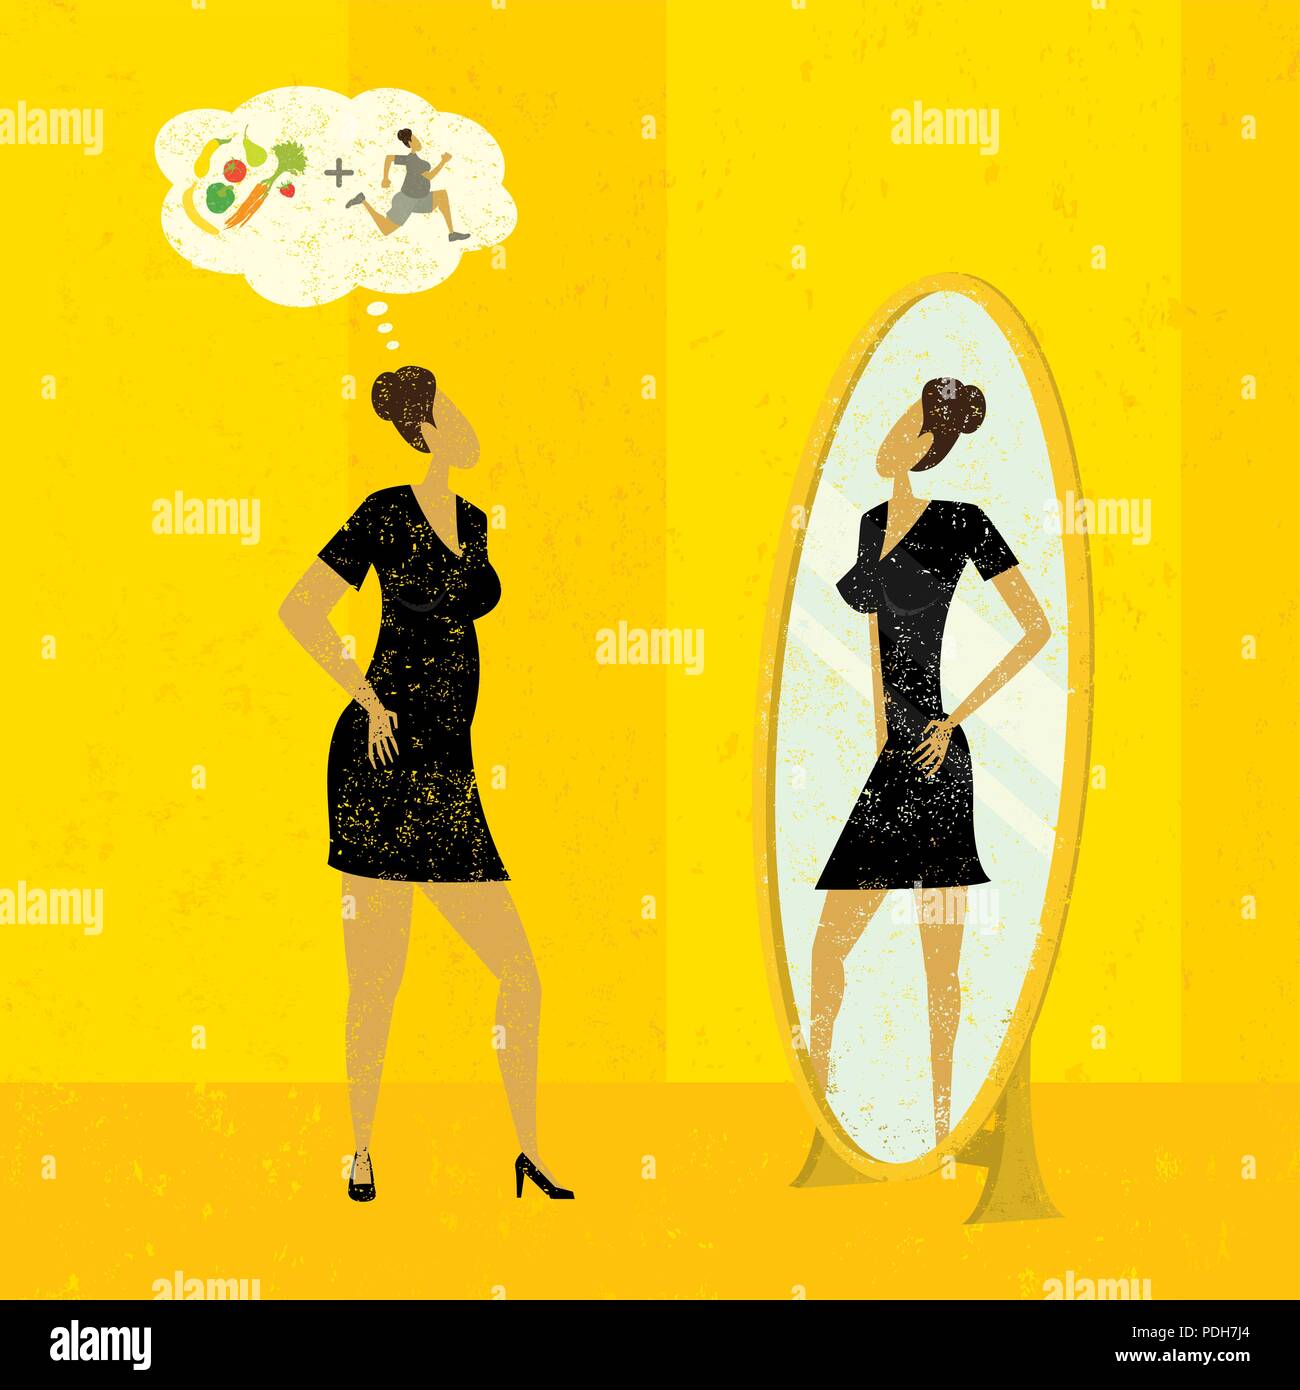 Imagining a slimmer figure. A woman looks into a mirror and sees the slimmer version of herself that she can achieve with diet and exercise. Stock Vector